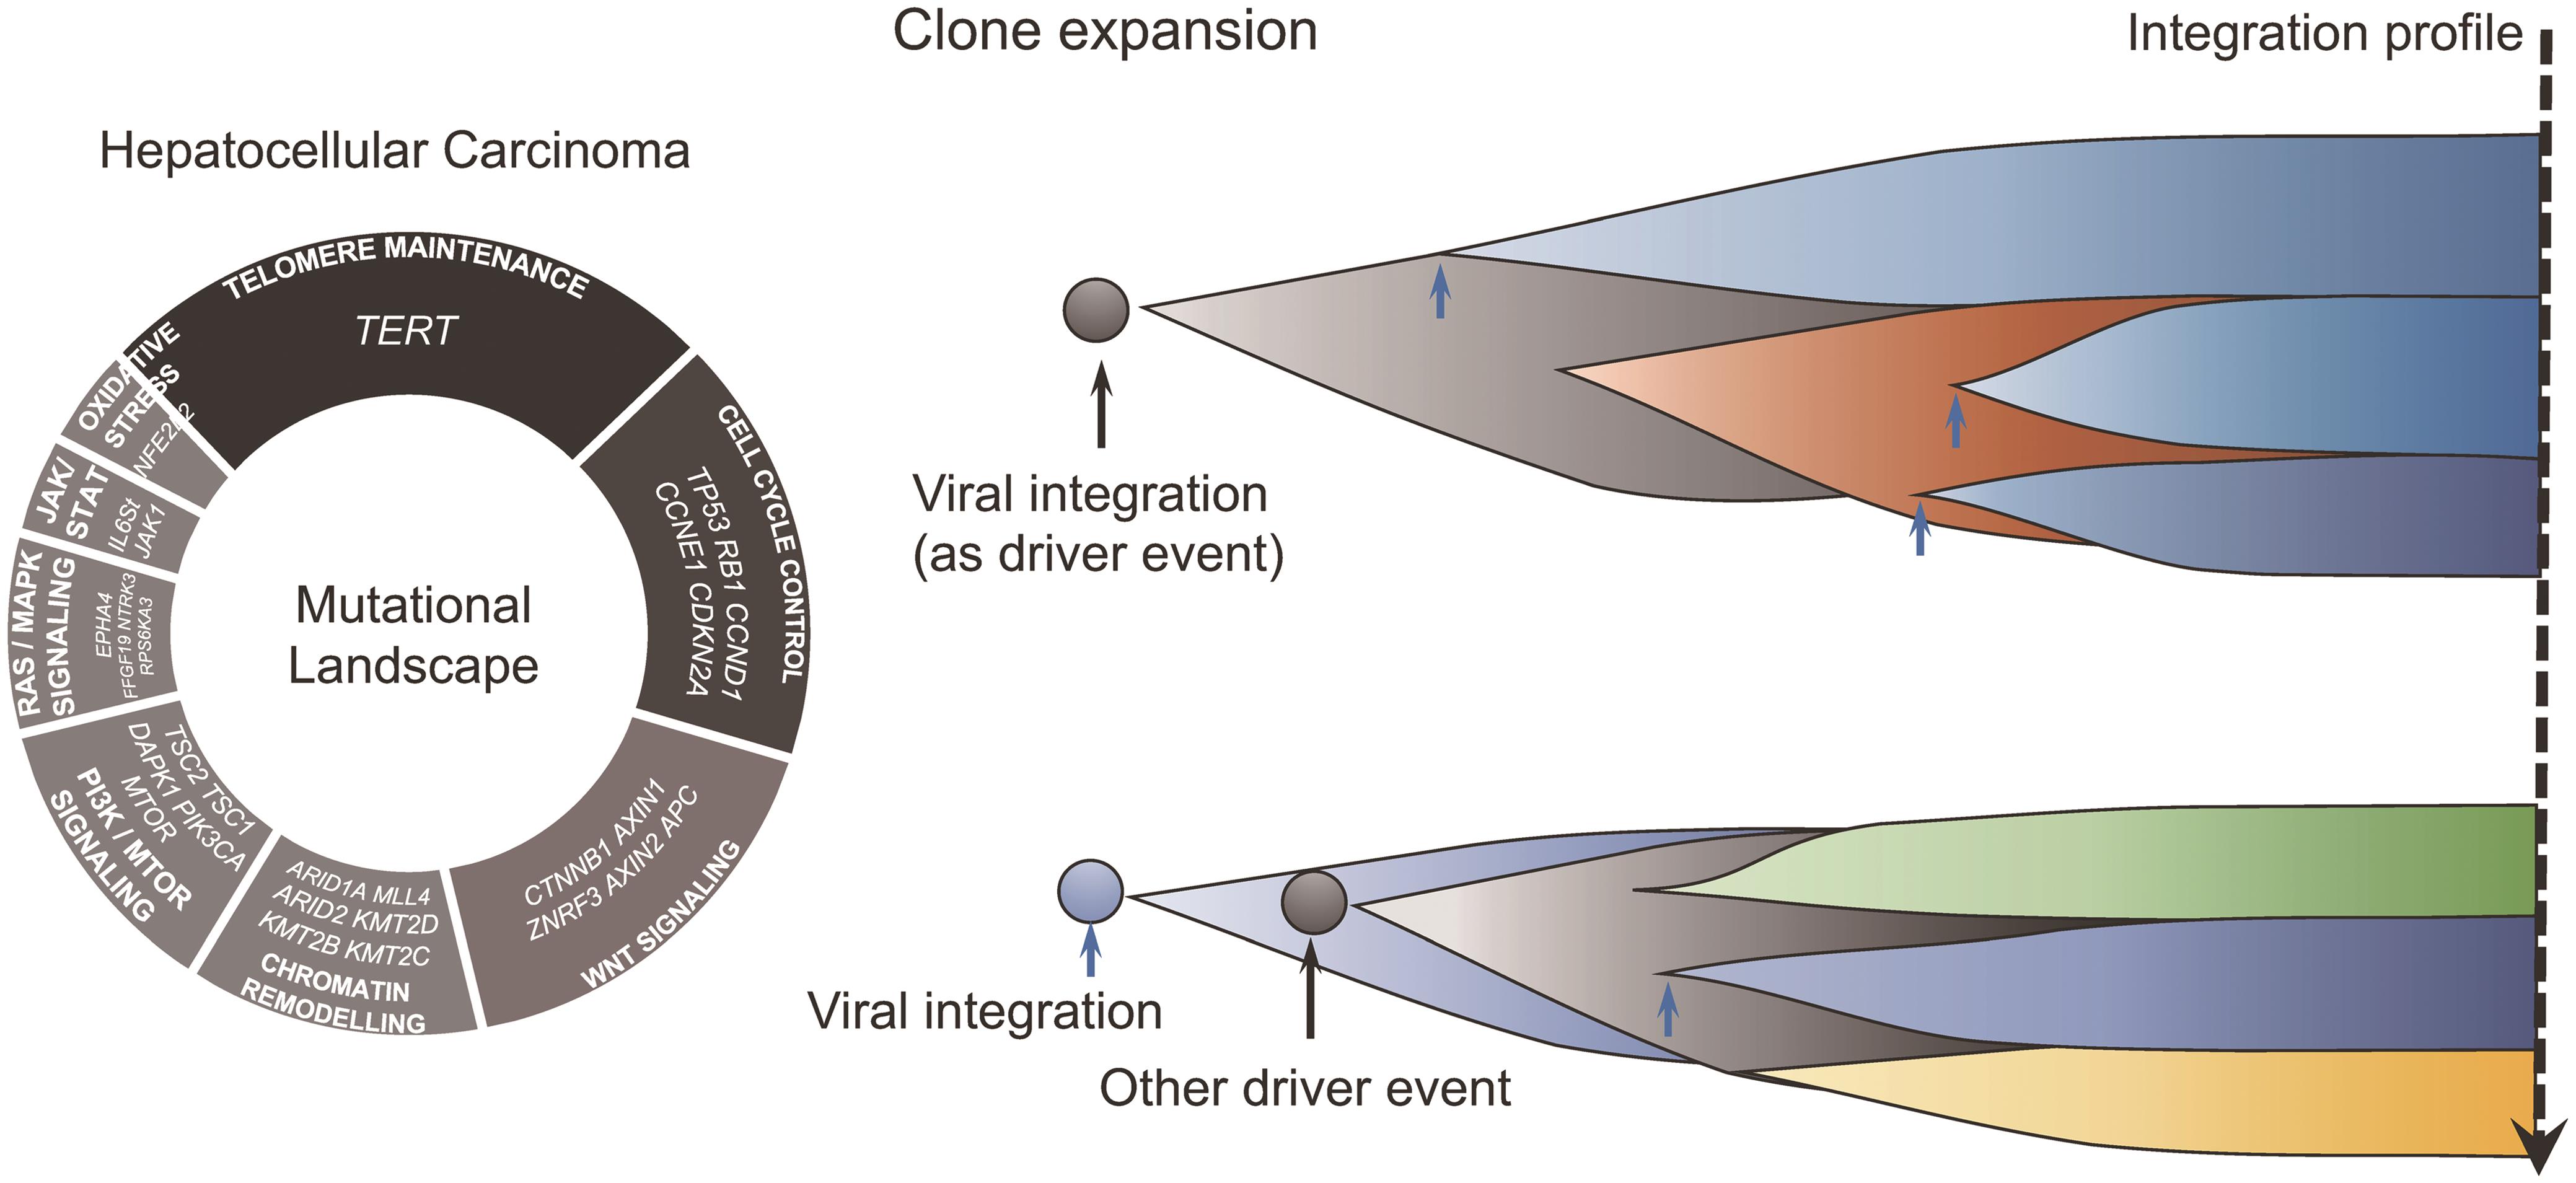 Oncogenic roles of viral integrations in clone evolution of tumorigenesis.